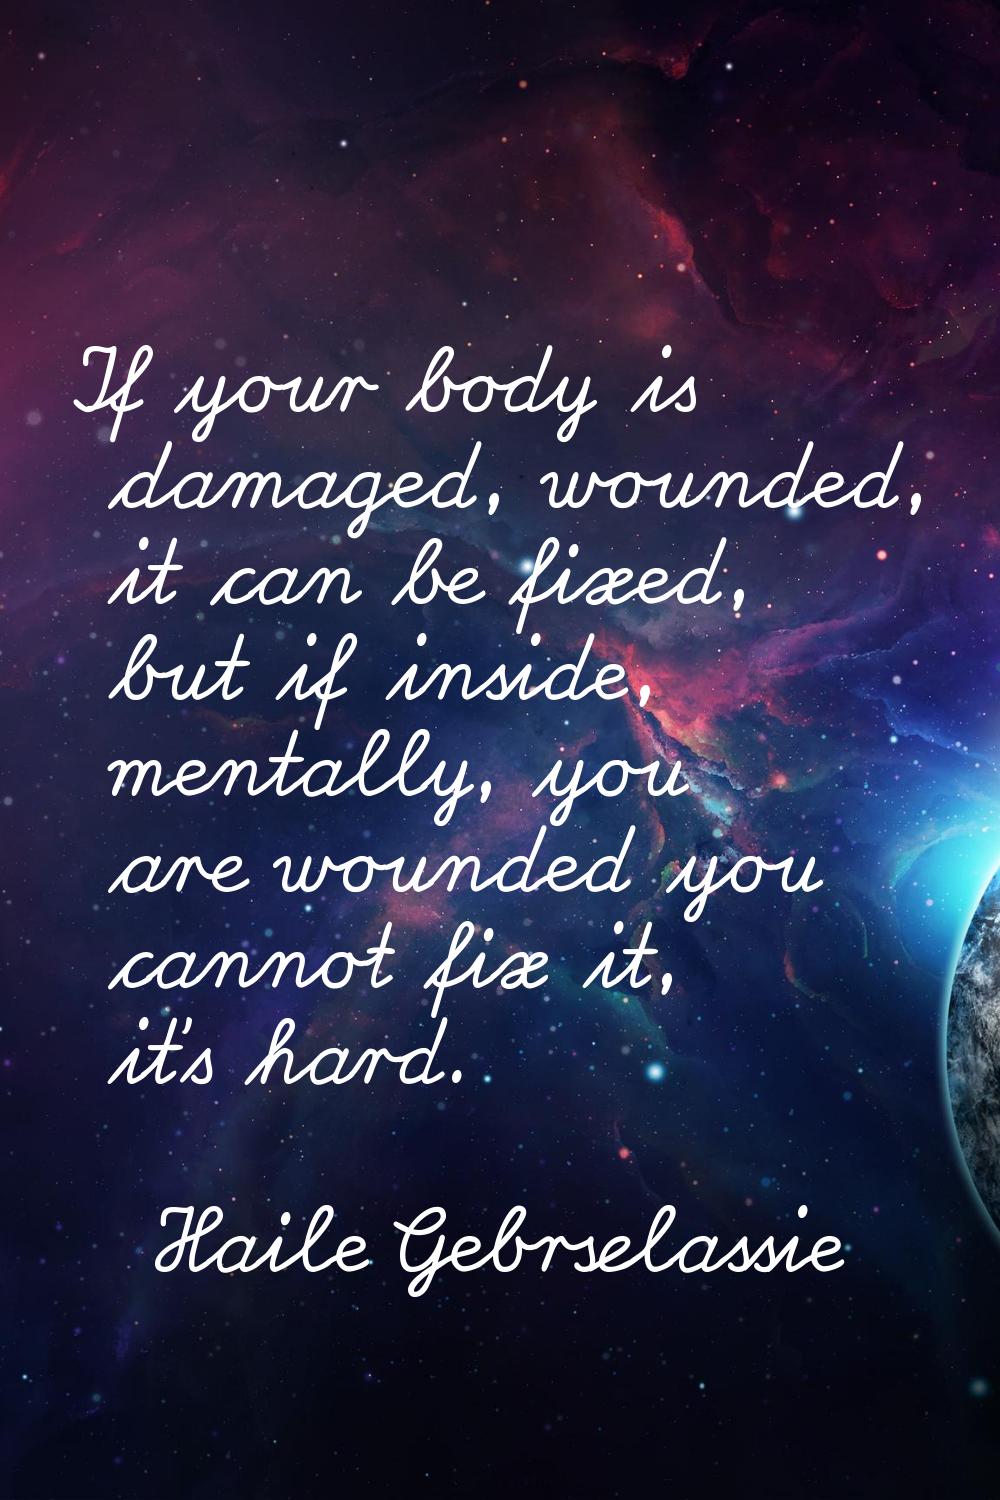 If your body is damaged, wounded, it can be fixed, but if inside, mentally, you are wounded you can